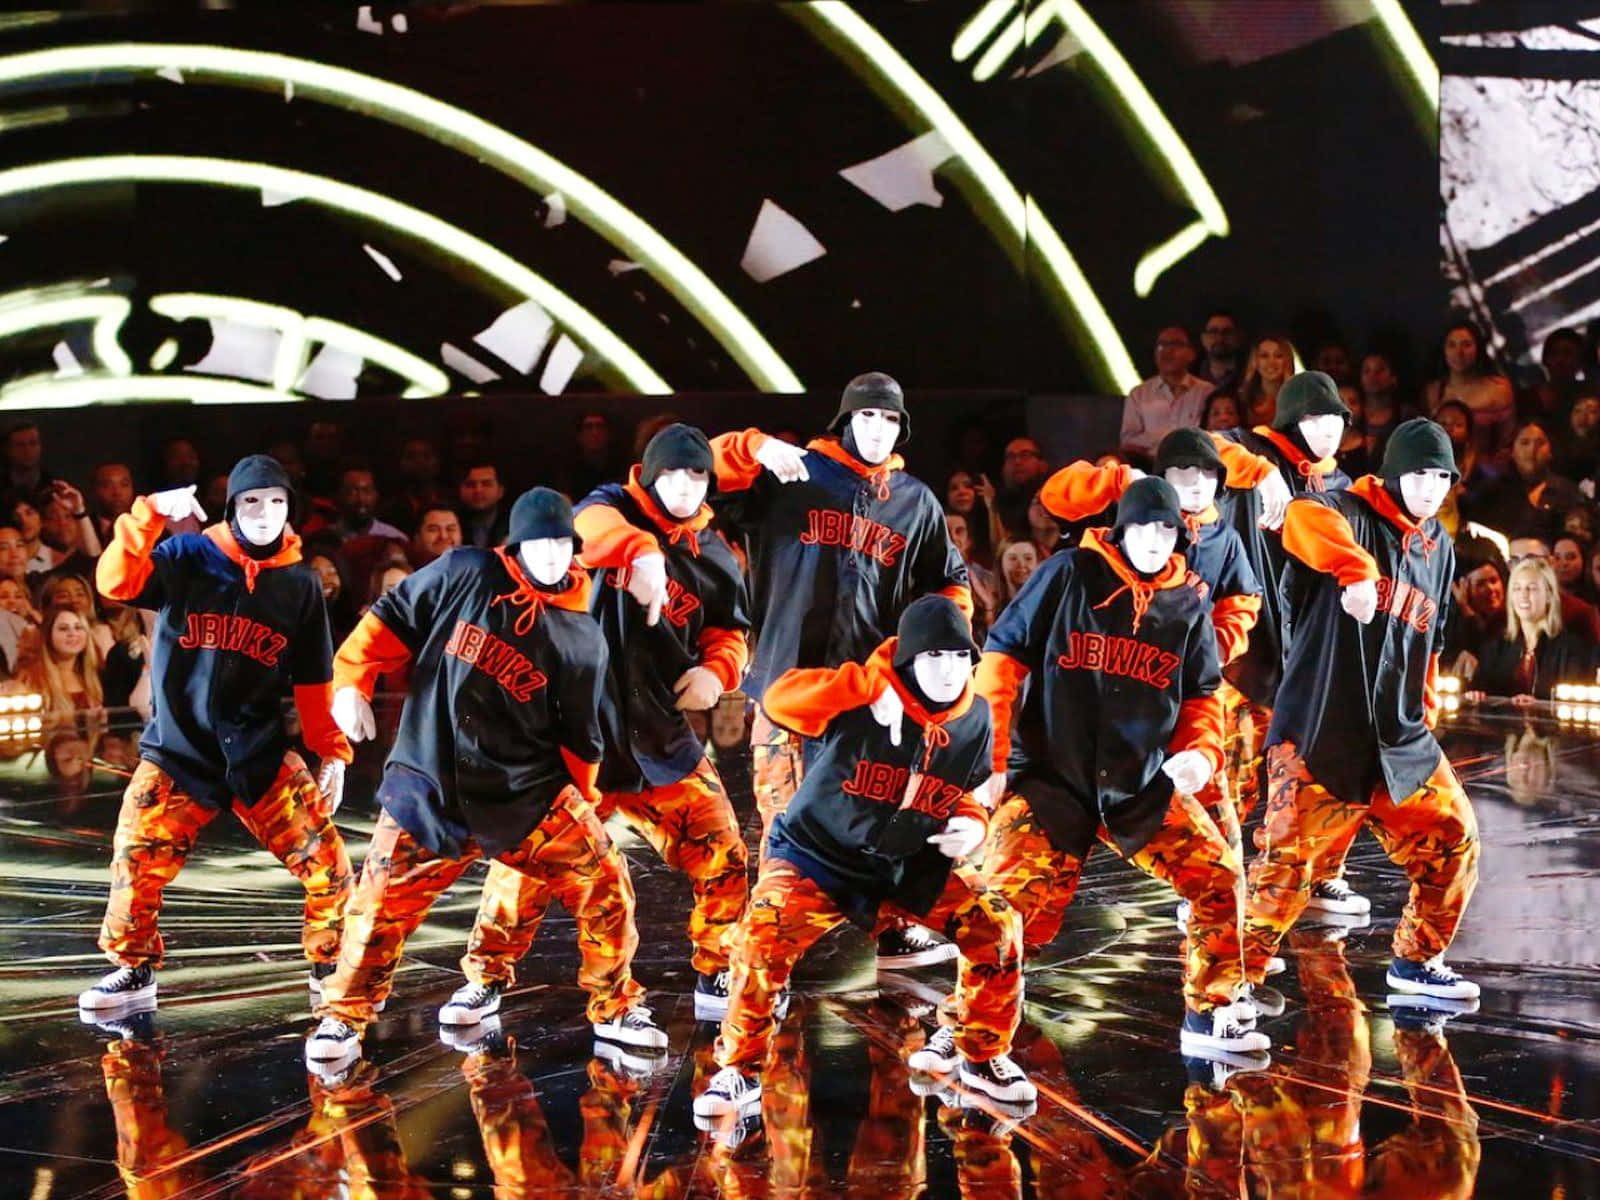 A Group Of Dancers In Orange And Black Outfits Wallpaper